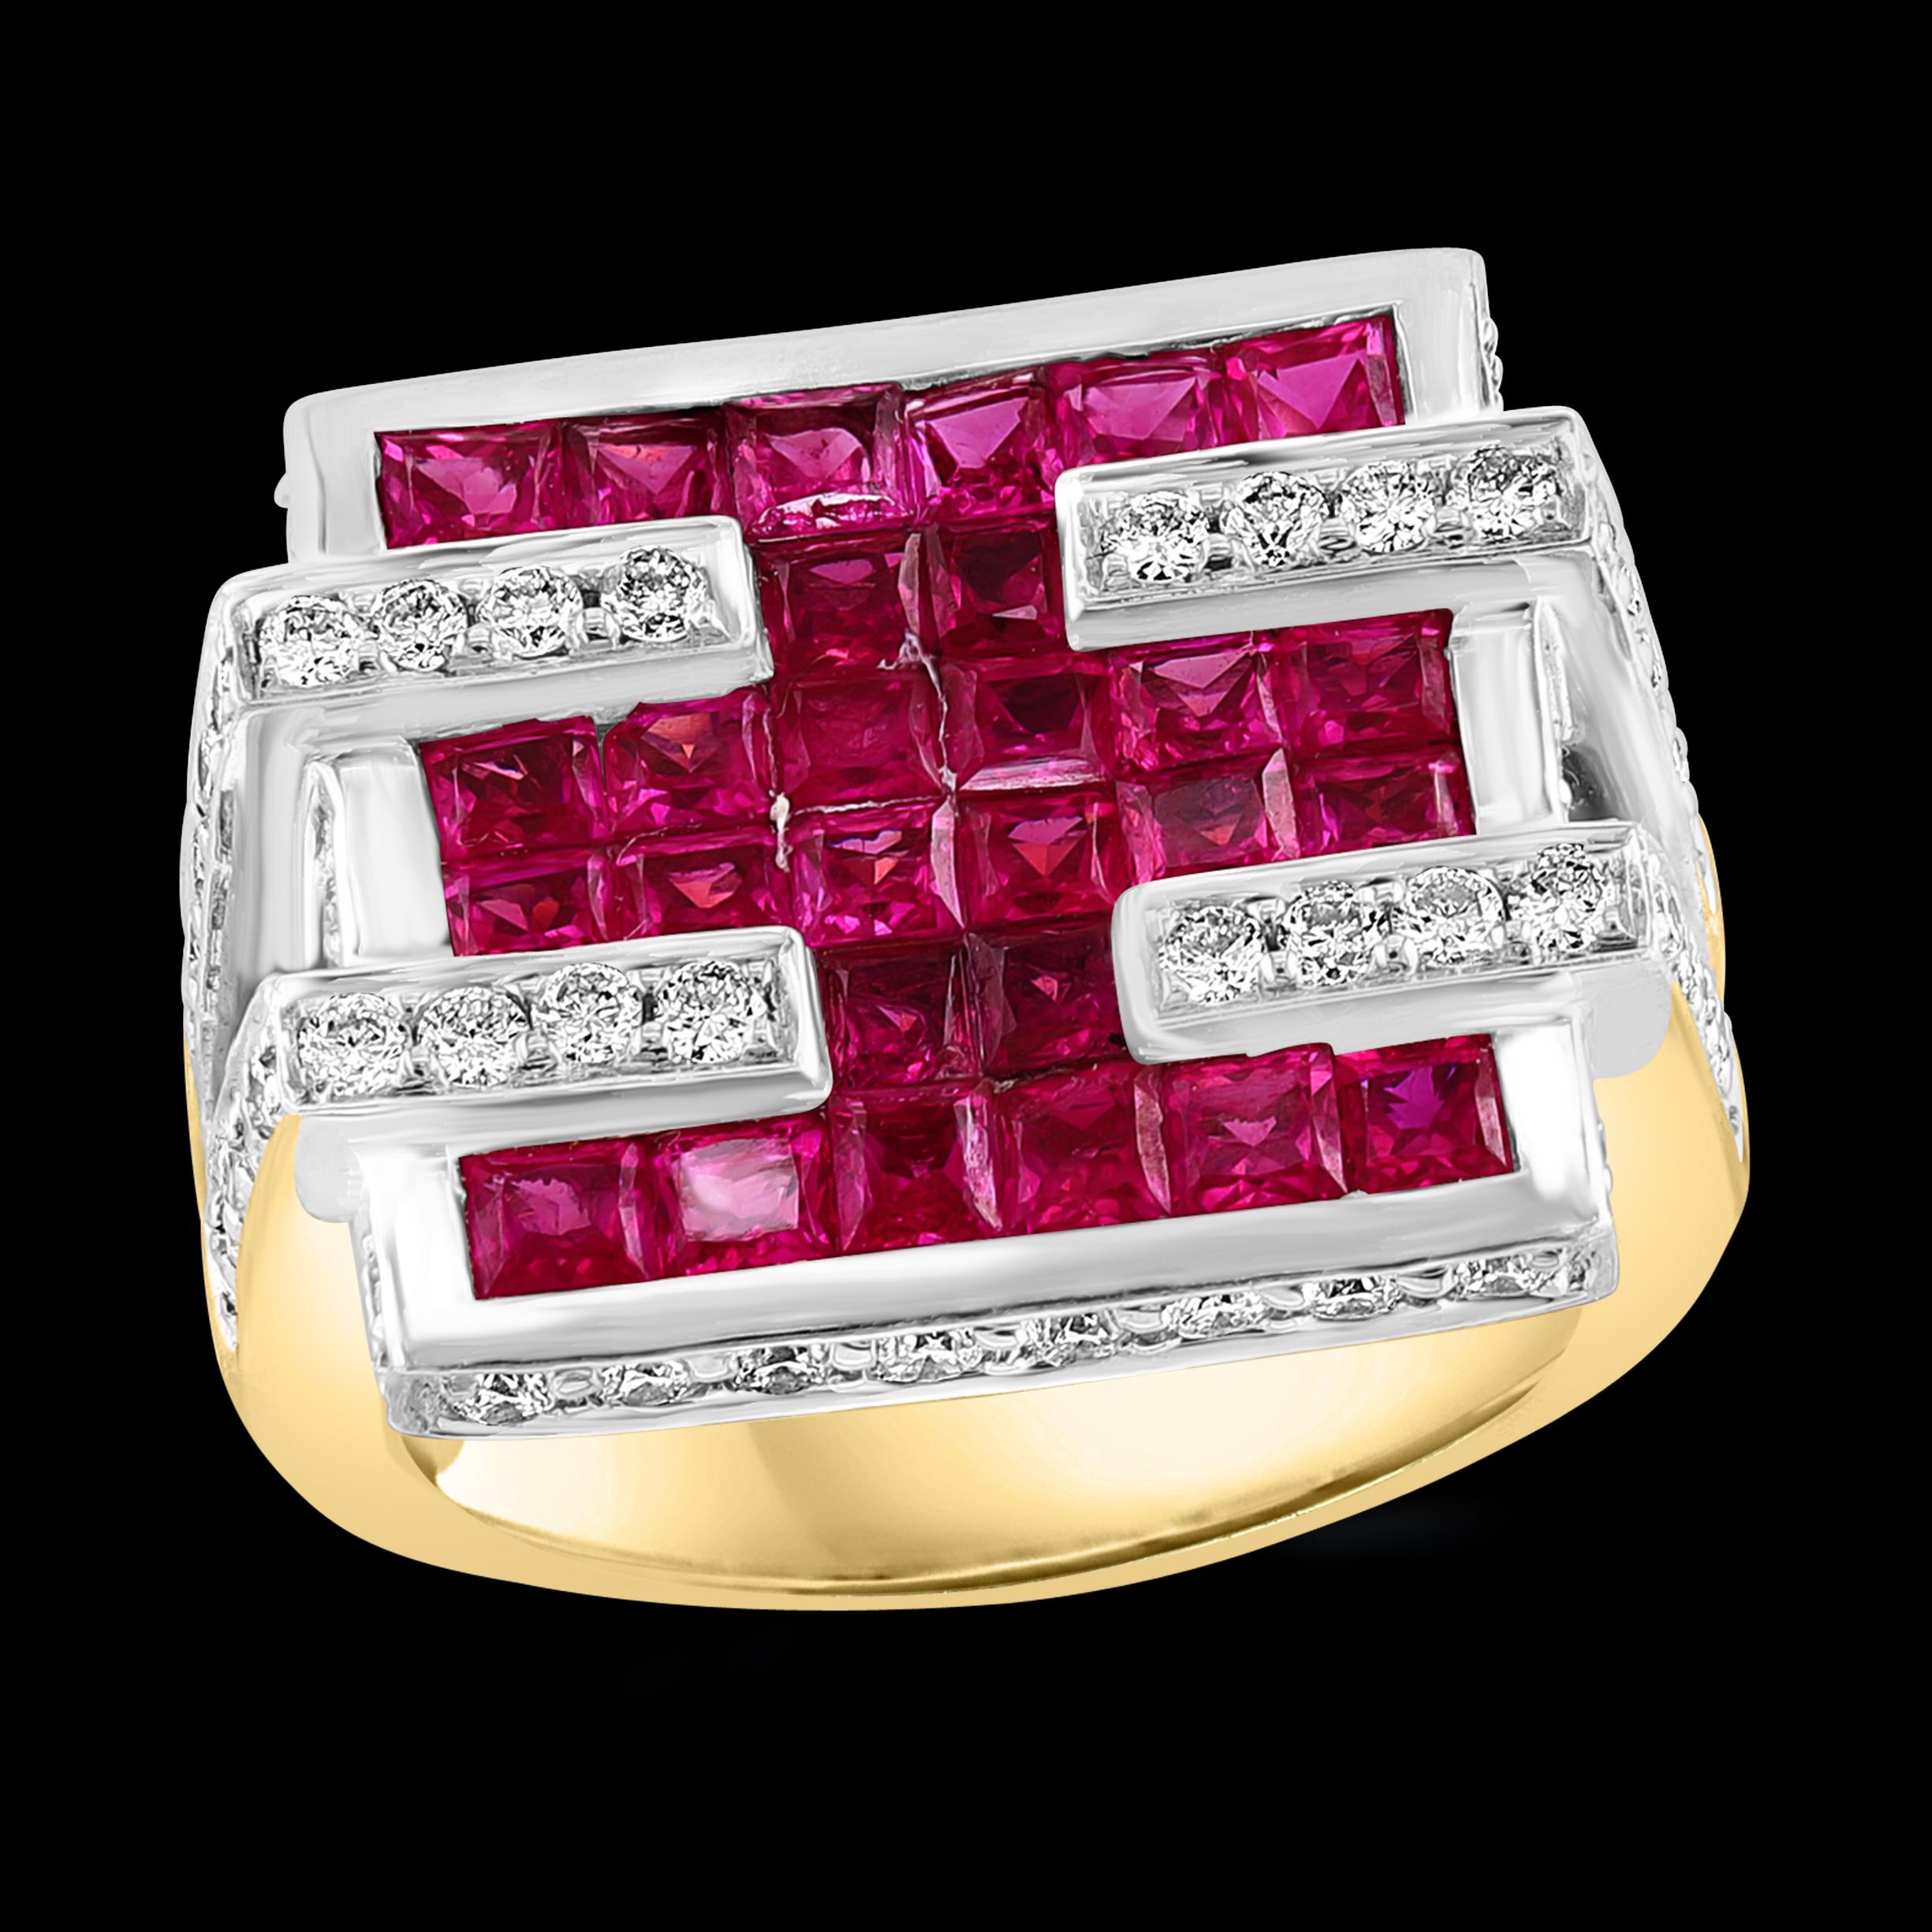 Diamonds & Princess Cut Invisible Set Rubies Men's Ring 18 Karat 2Tone Gold Ring
Invisible or Mystery set  Princess cut  Natural  Ruby  And  Diamond  ring in 18 K  Yellow  and white Gold  . 
perfect Ring for men  made in  18 Karat  gold . 
Simple